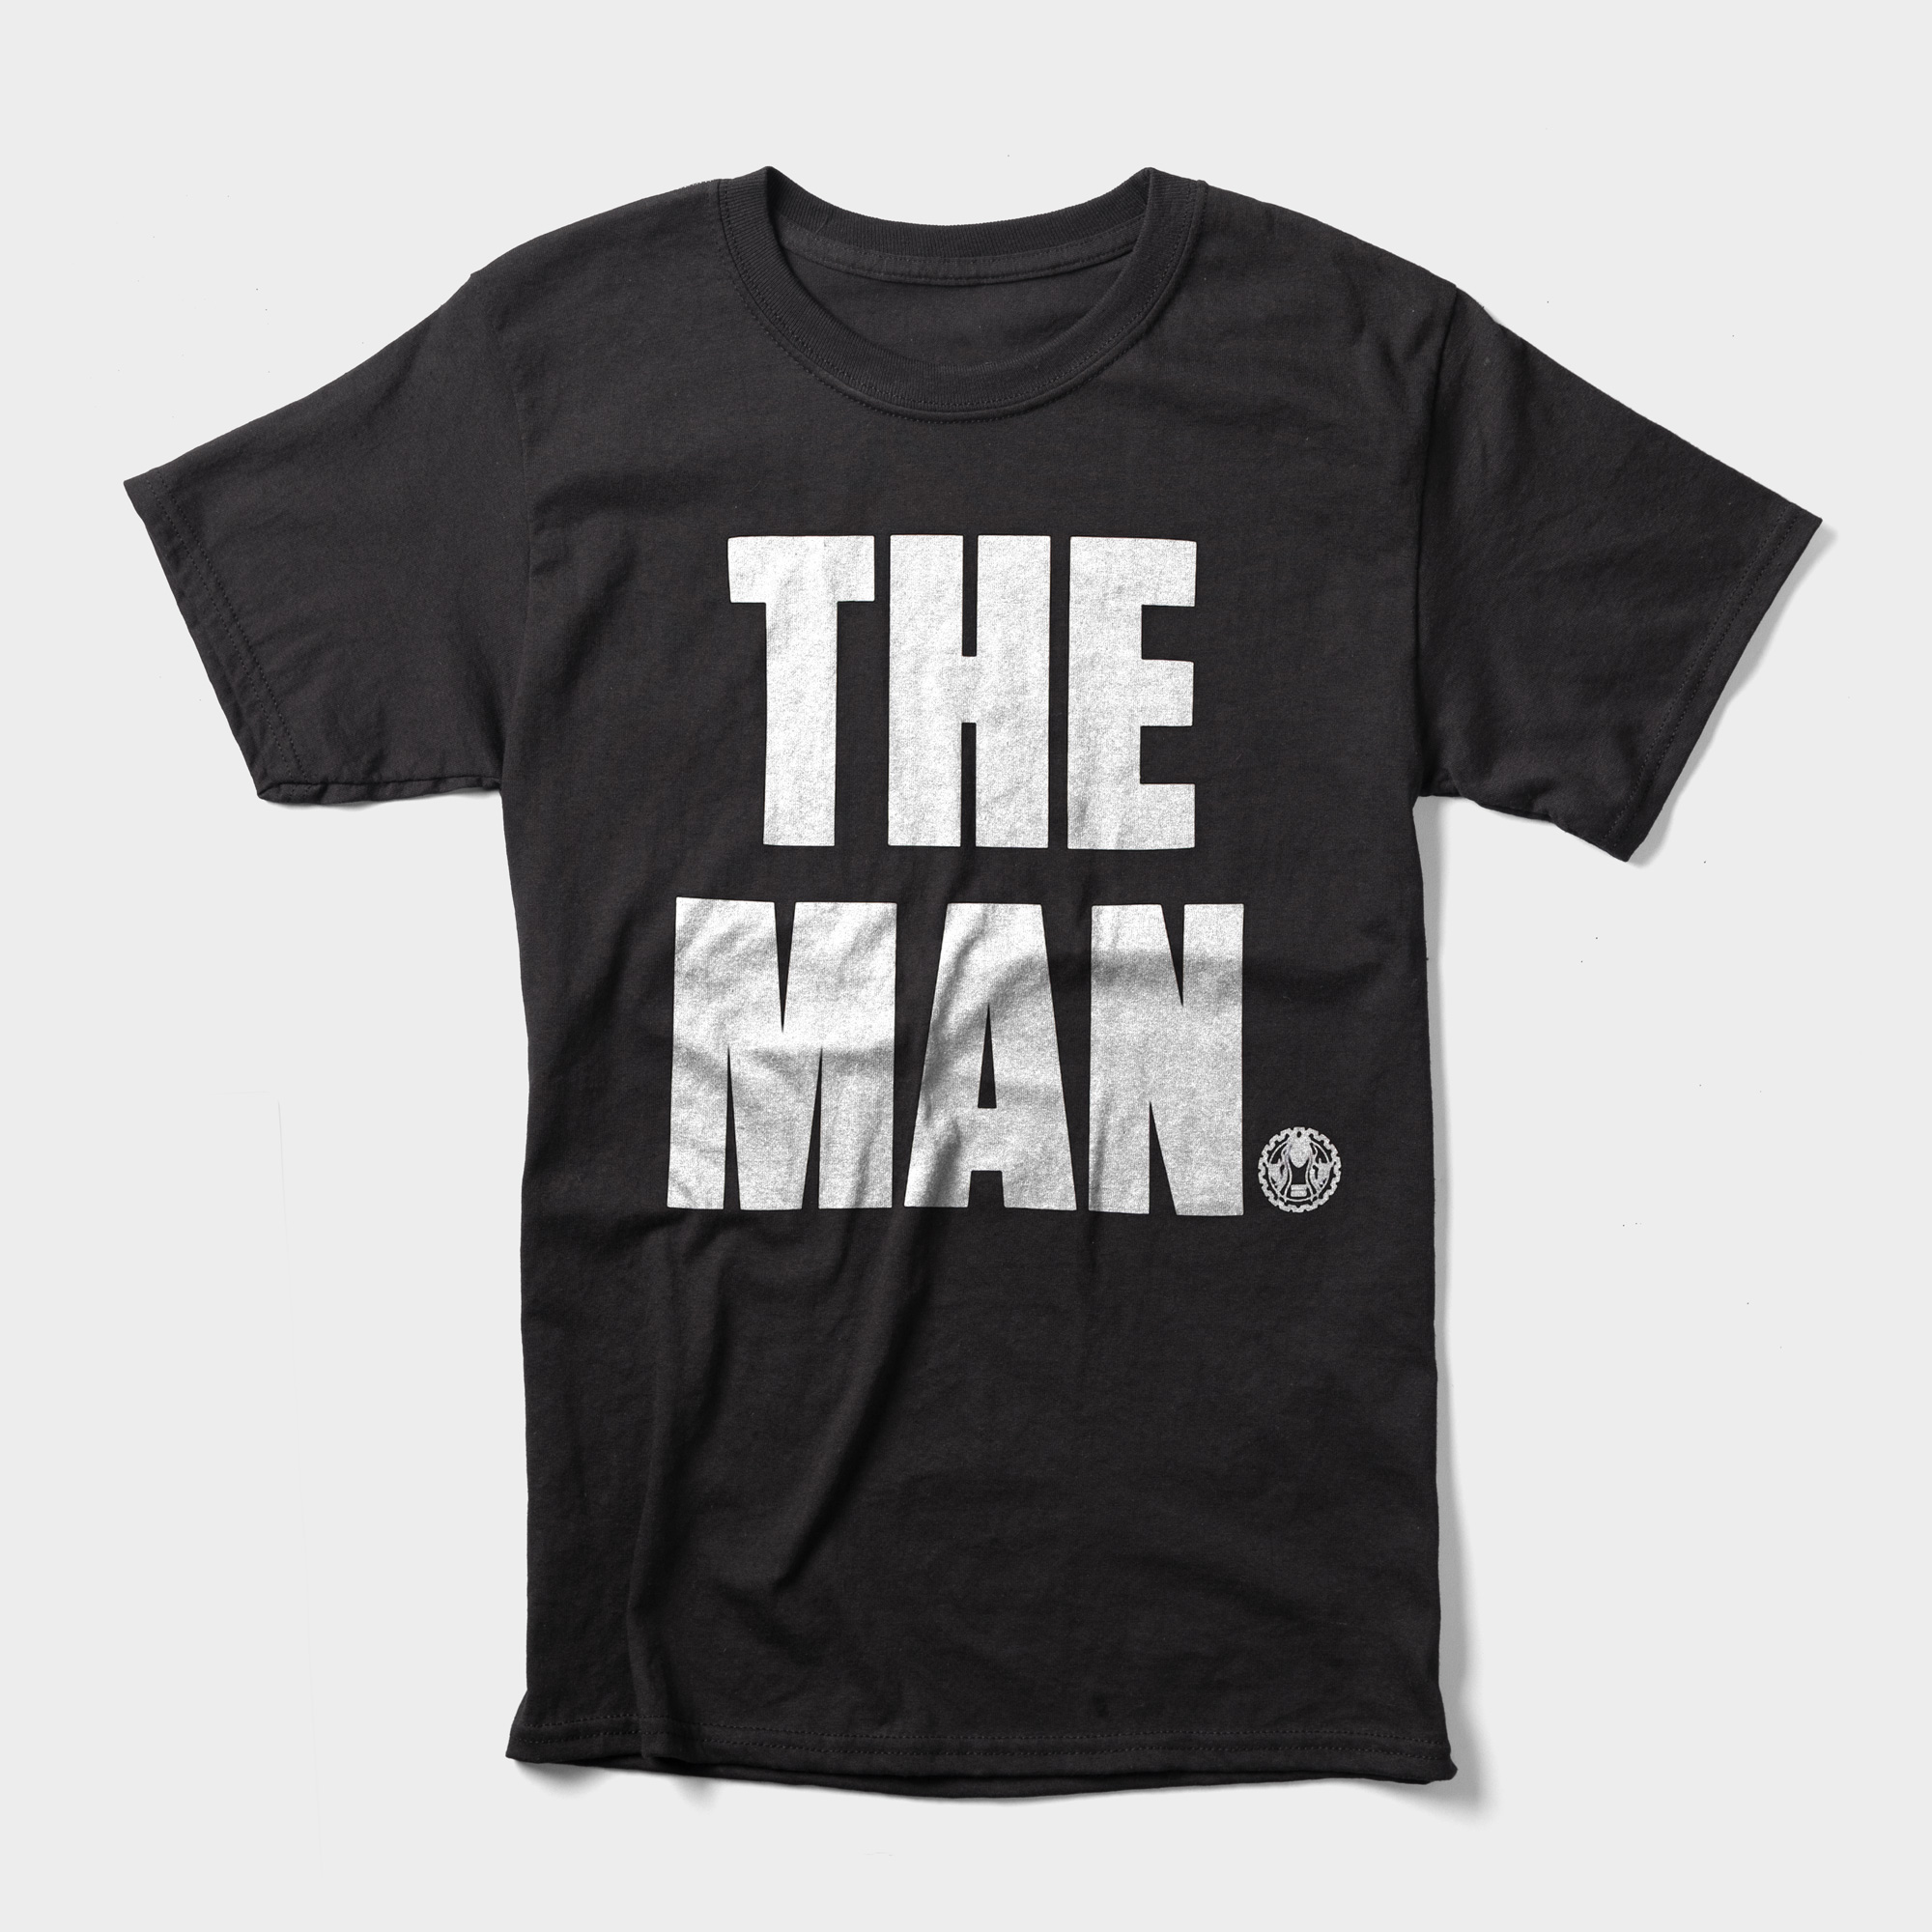 Becky Lynch's The Man t-shirt may have a straightforward design with "The Man" in white text, but it made an huge impact. 